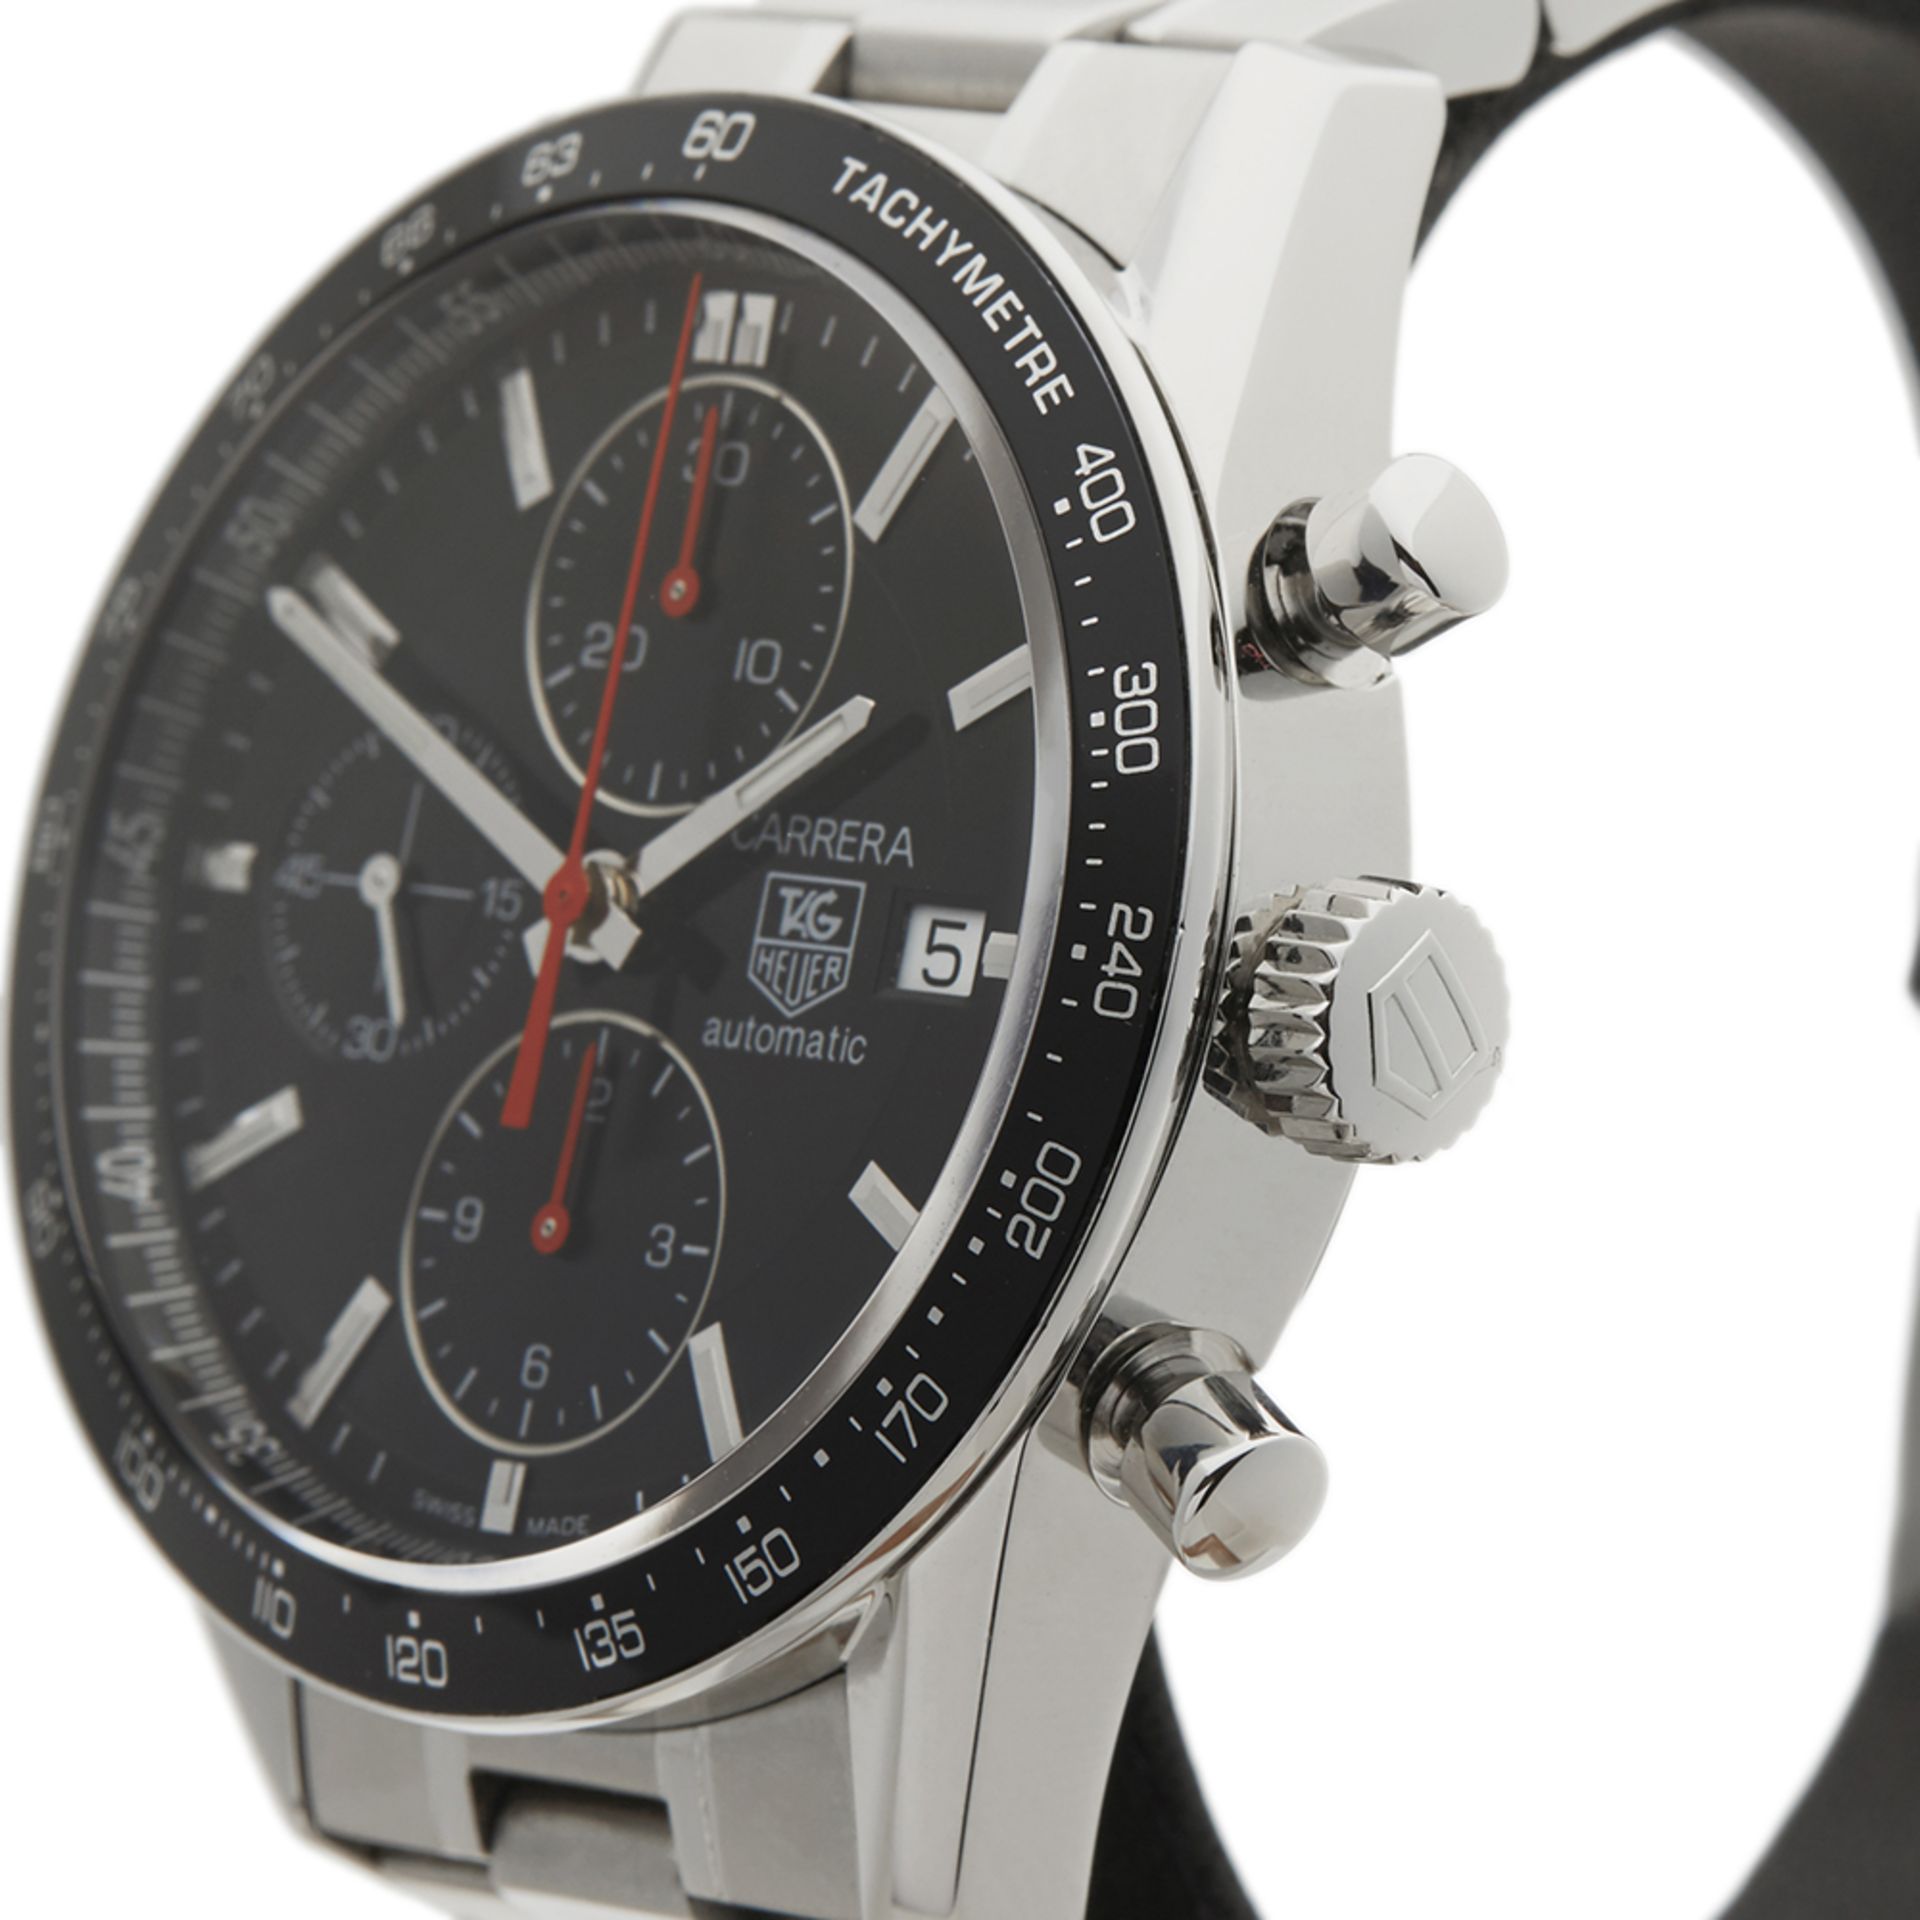 Tag Heuer Carrera Chronograph 41mm Stainless Steel - CV2014.BA0794 - Image 4 of 8